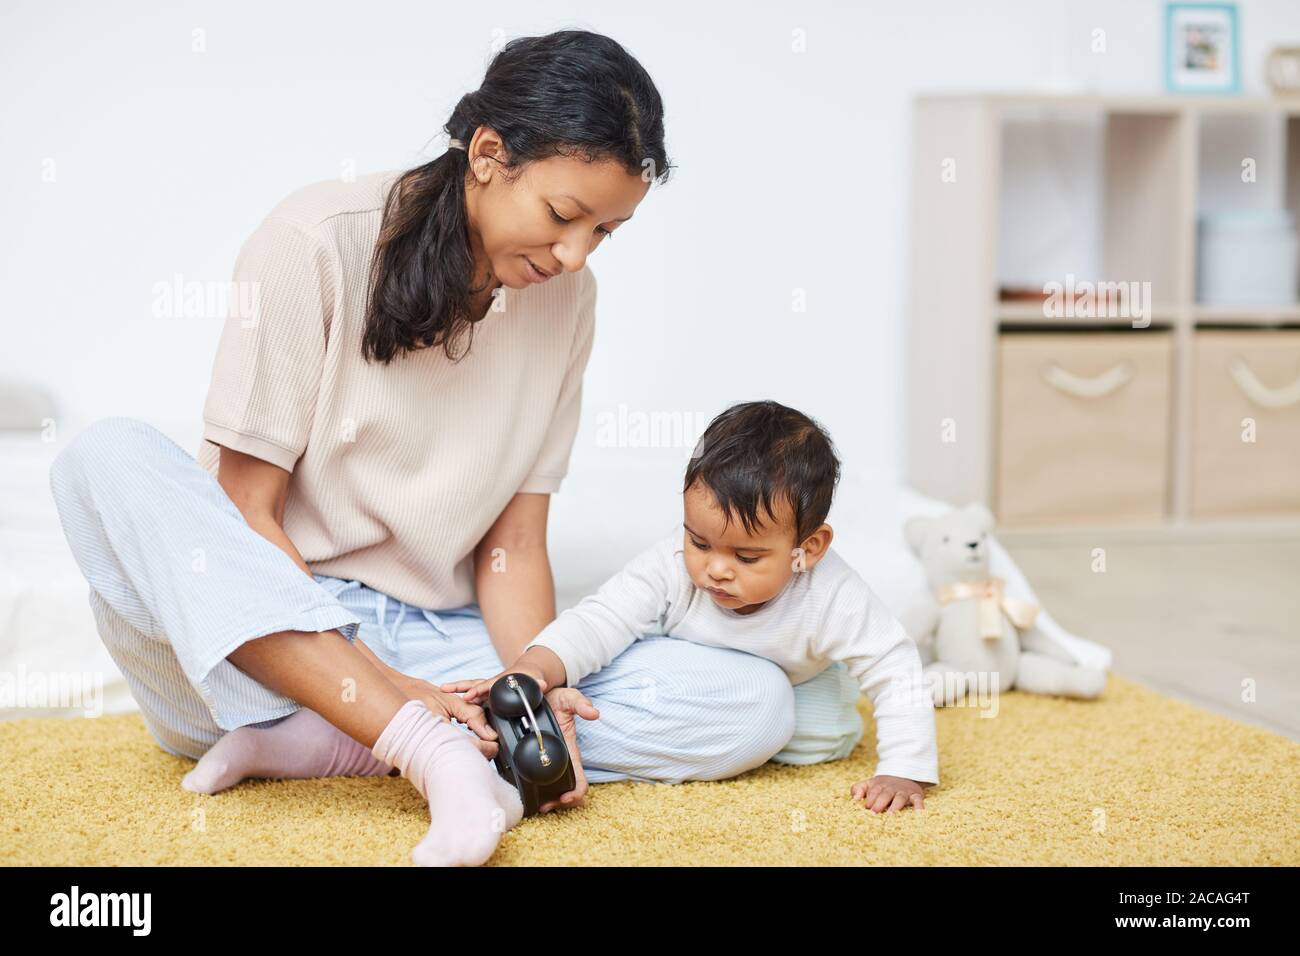 Young mother in casual clothing sitting on the floor and showing the clock to her little child Stock Photo